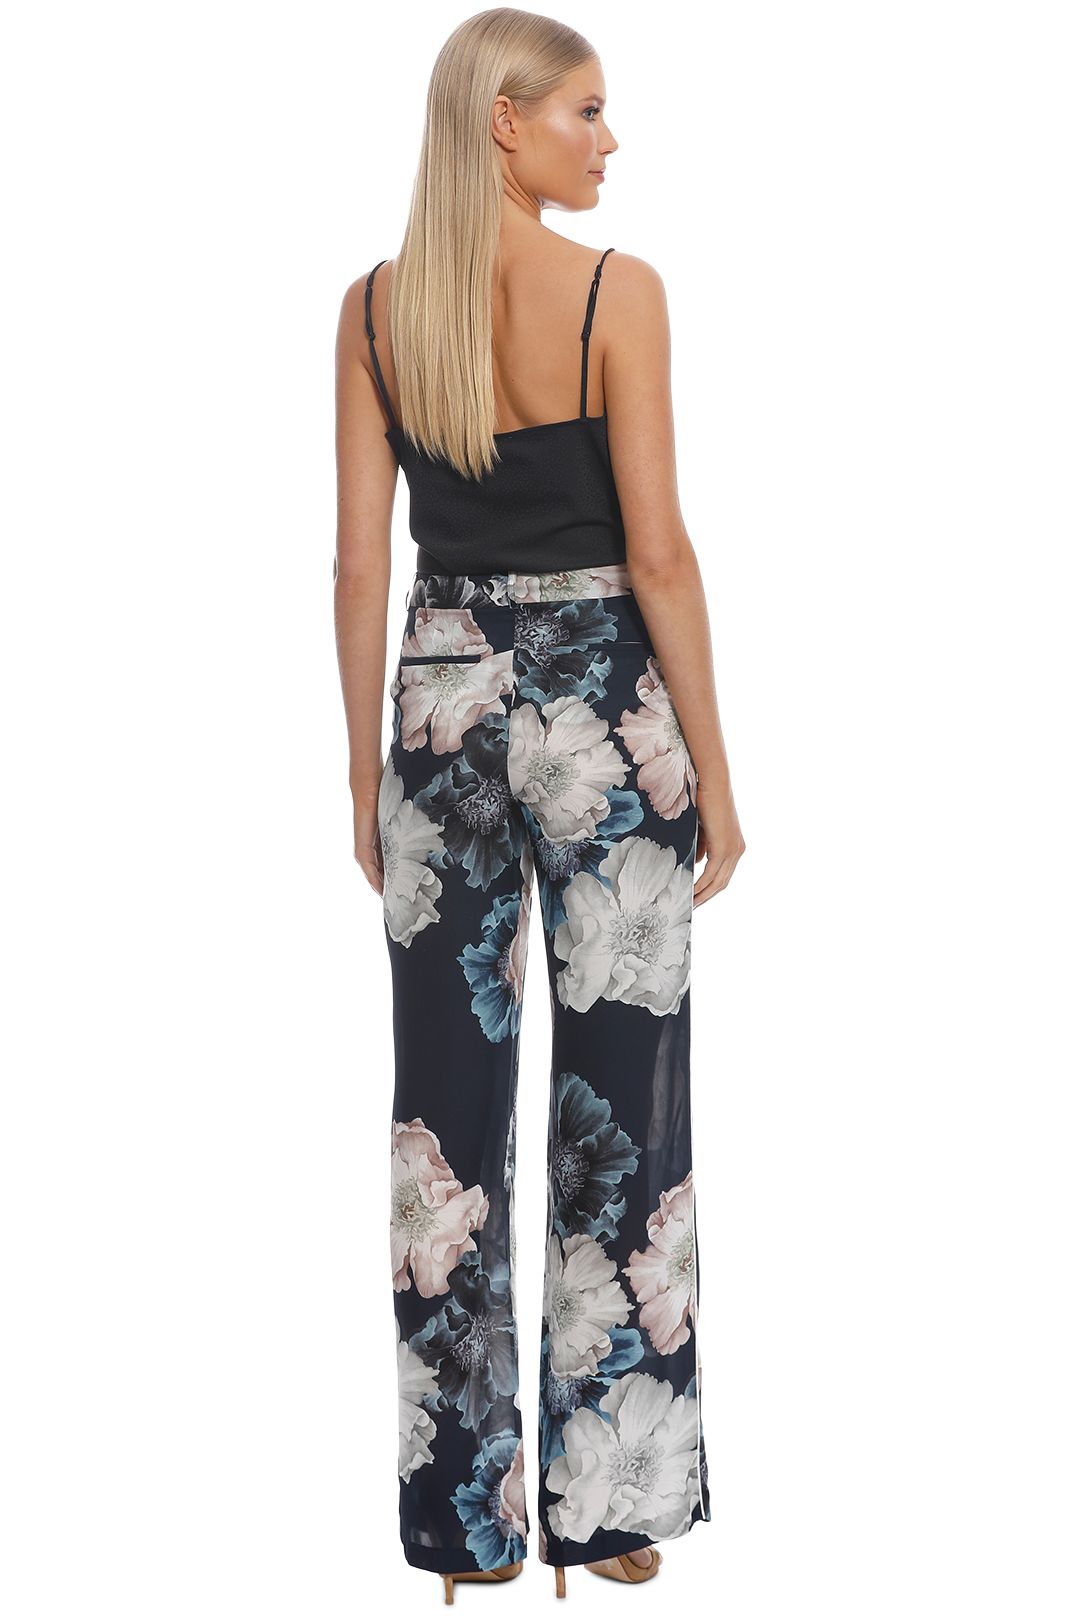 Nicholas The Label - Navy Floral Palazzo Pant - Navy - Back